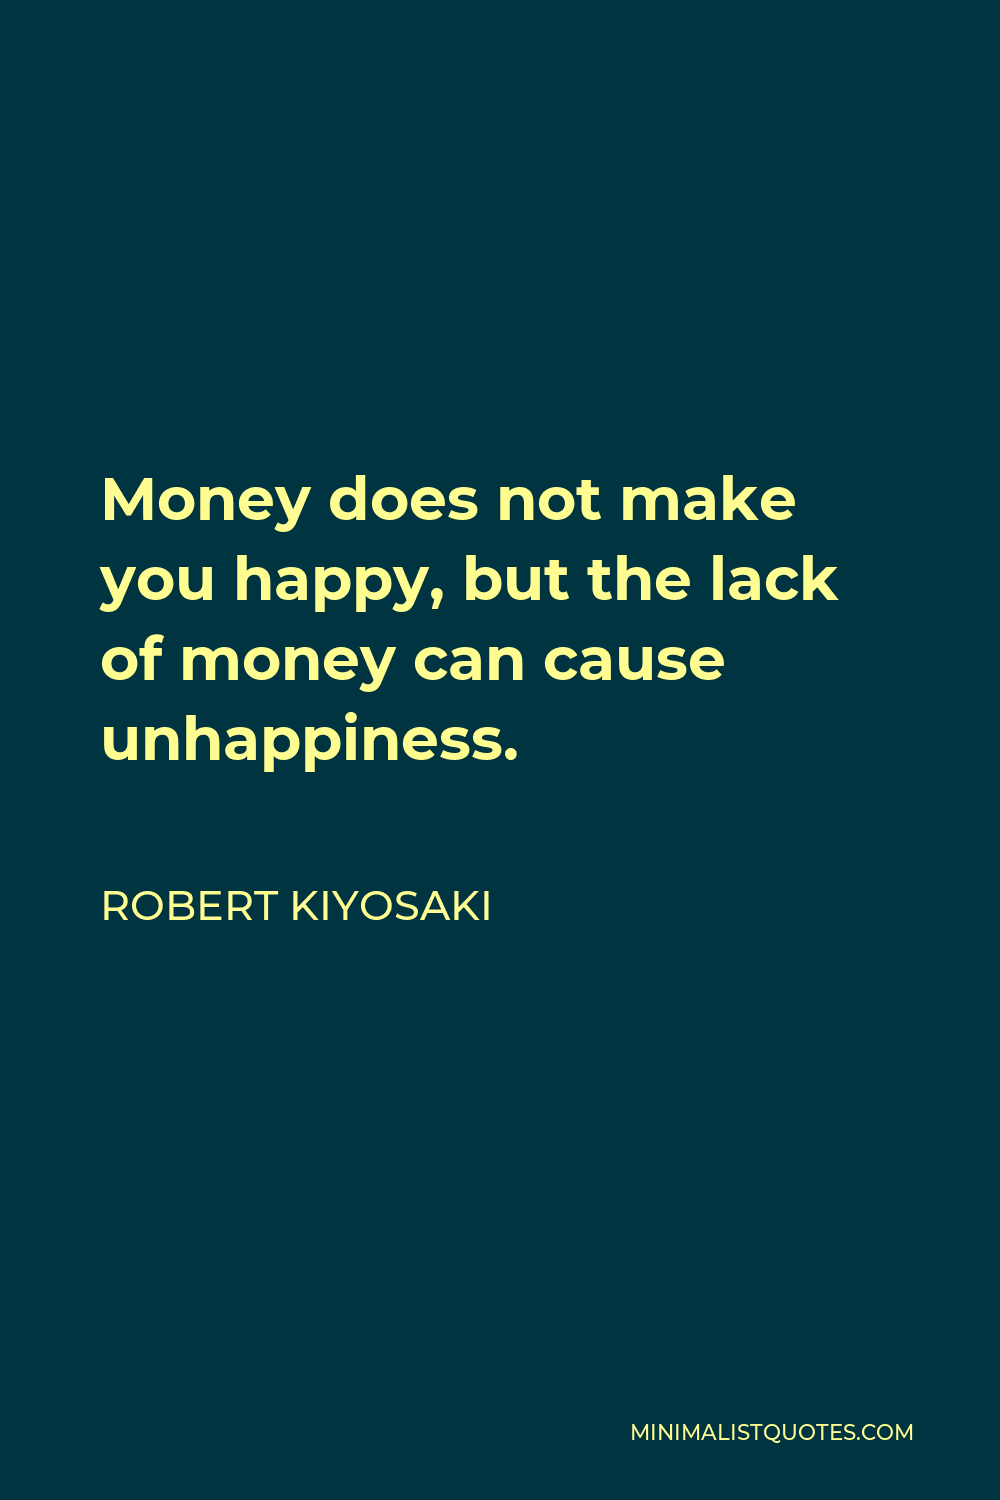 Robert Kiyosaki Quote - Money does not make you happy, but the lack of money can cause unhappiness.